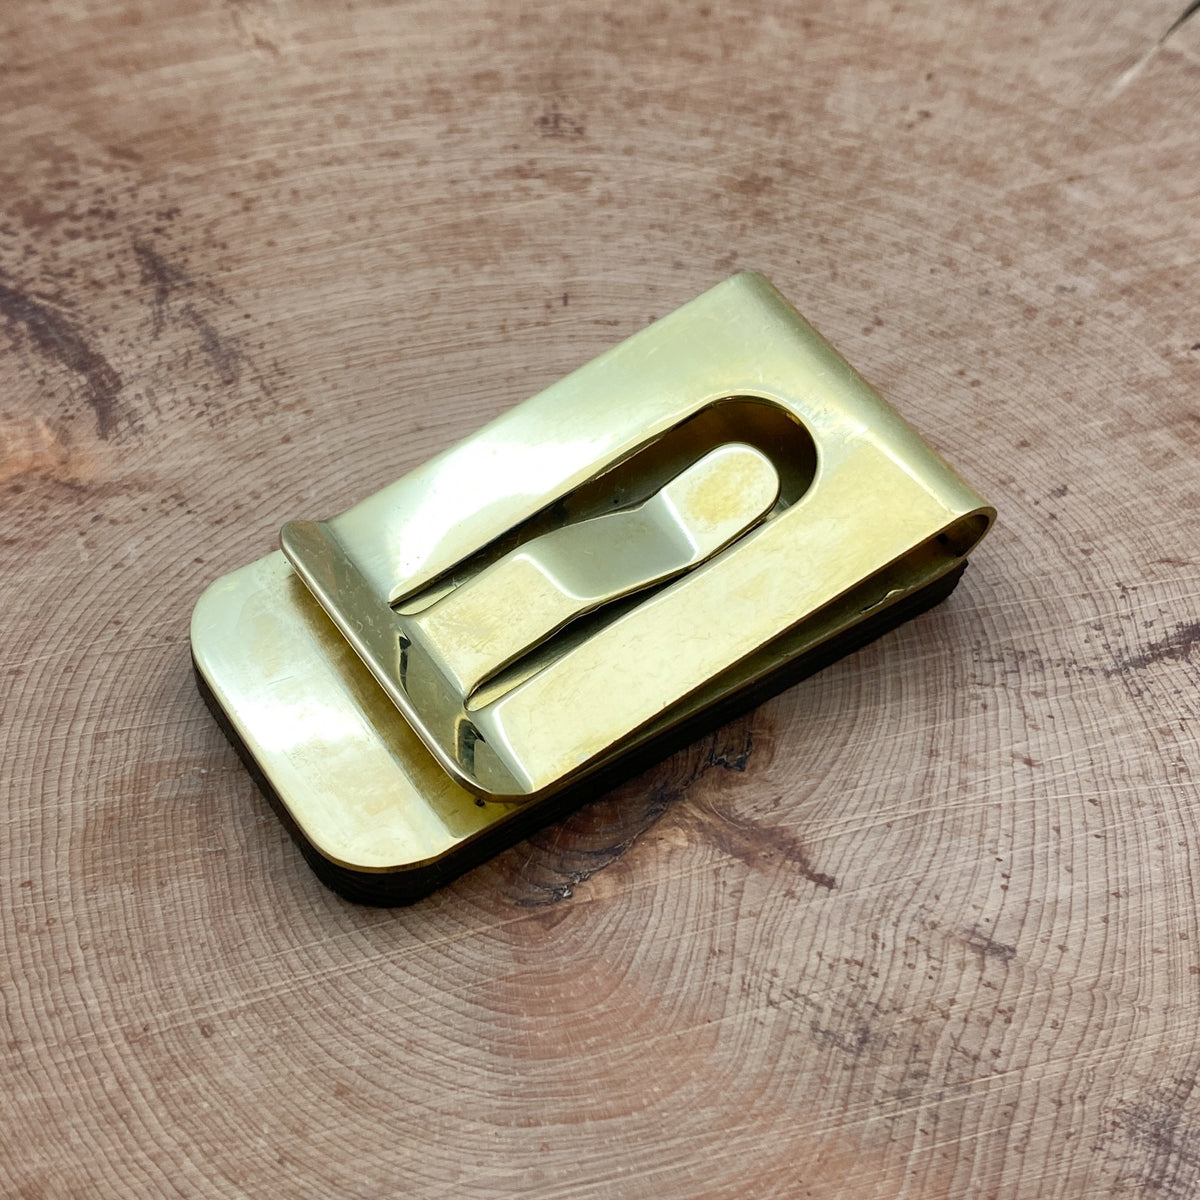 The brass backside of an authentic 1904 Chief Penny money clip that is set into natural wood.